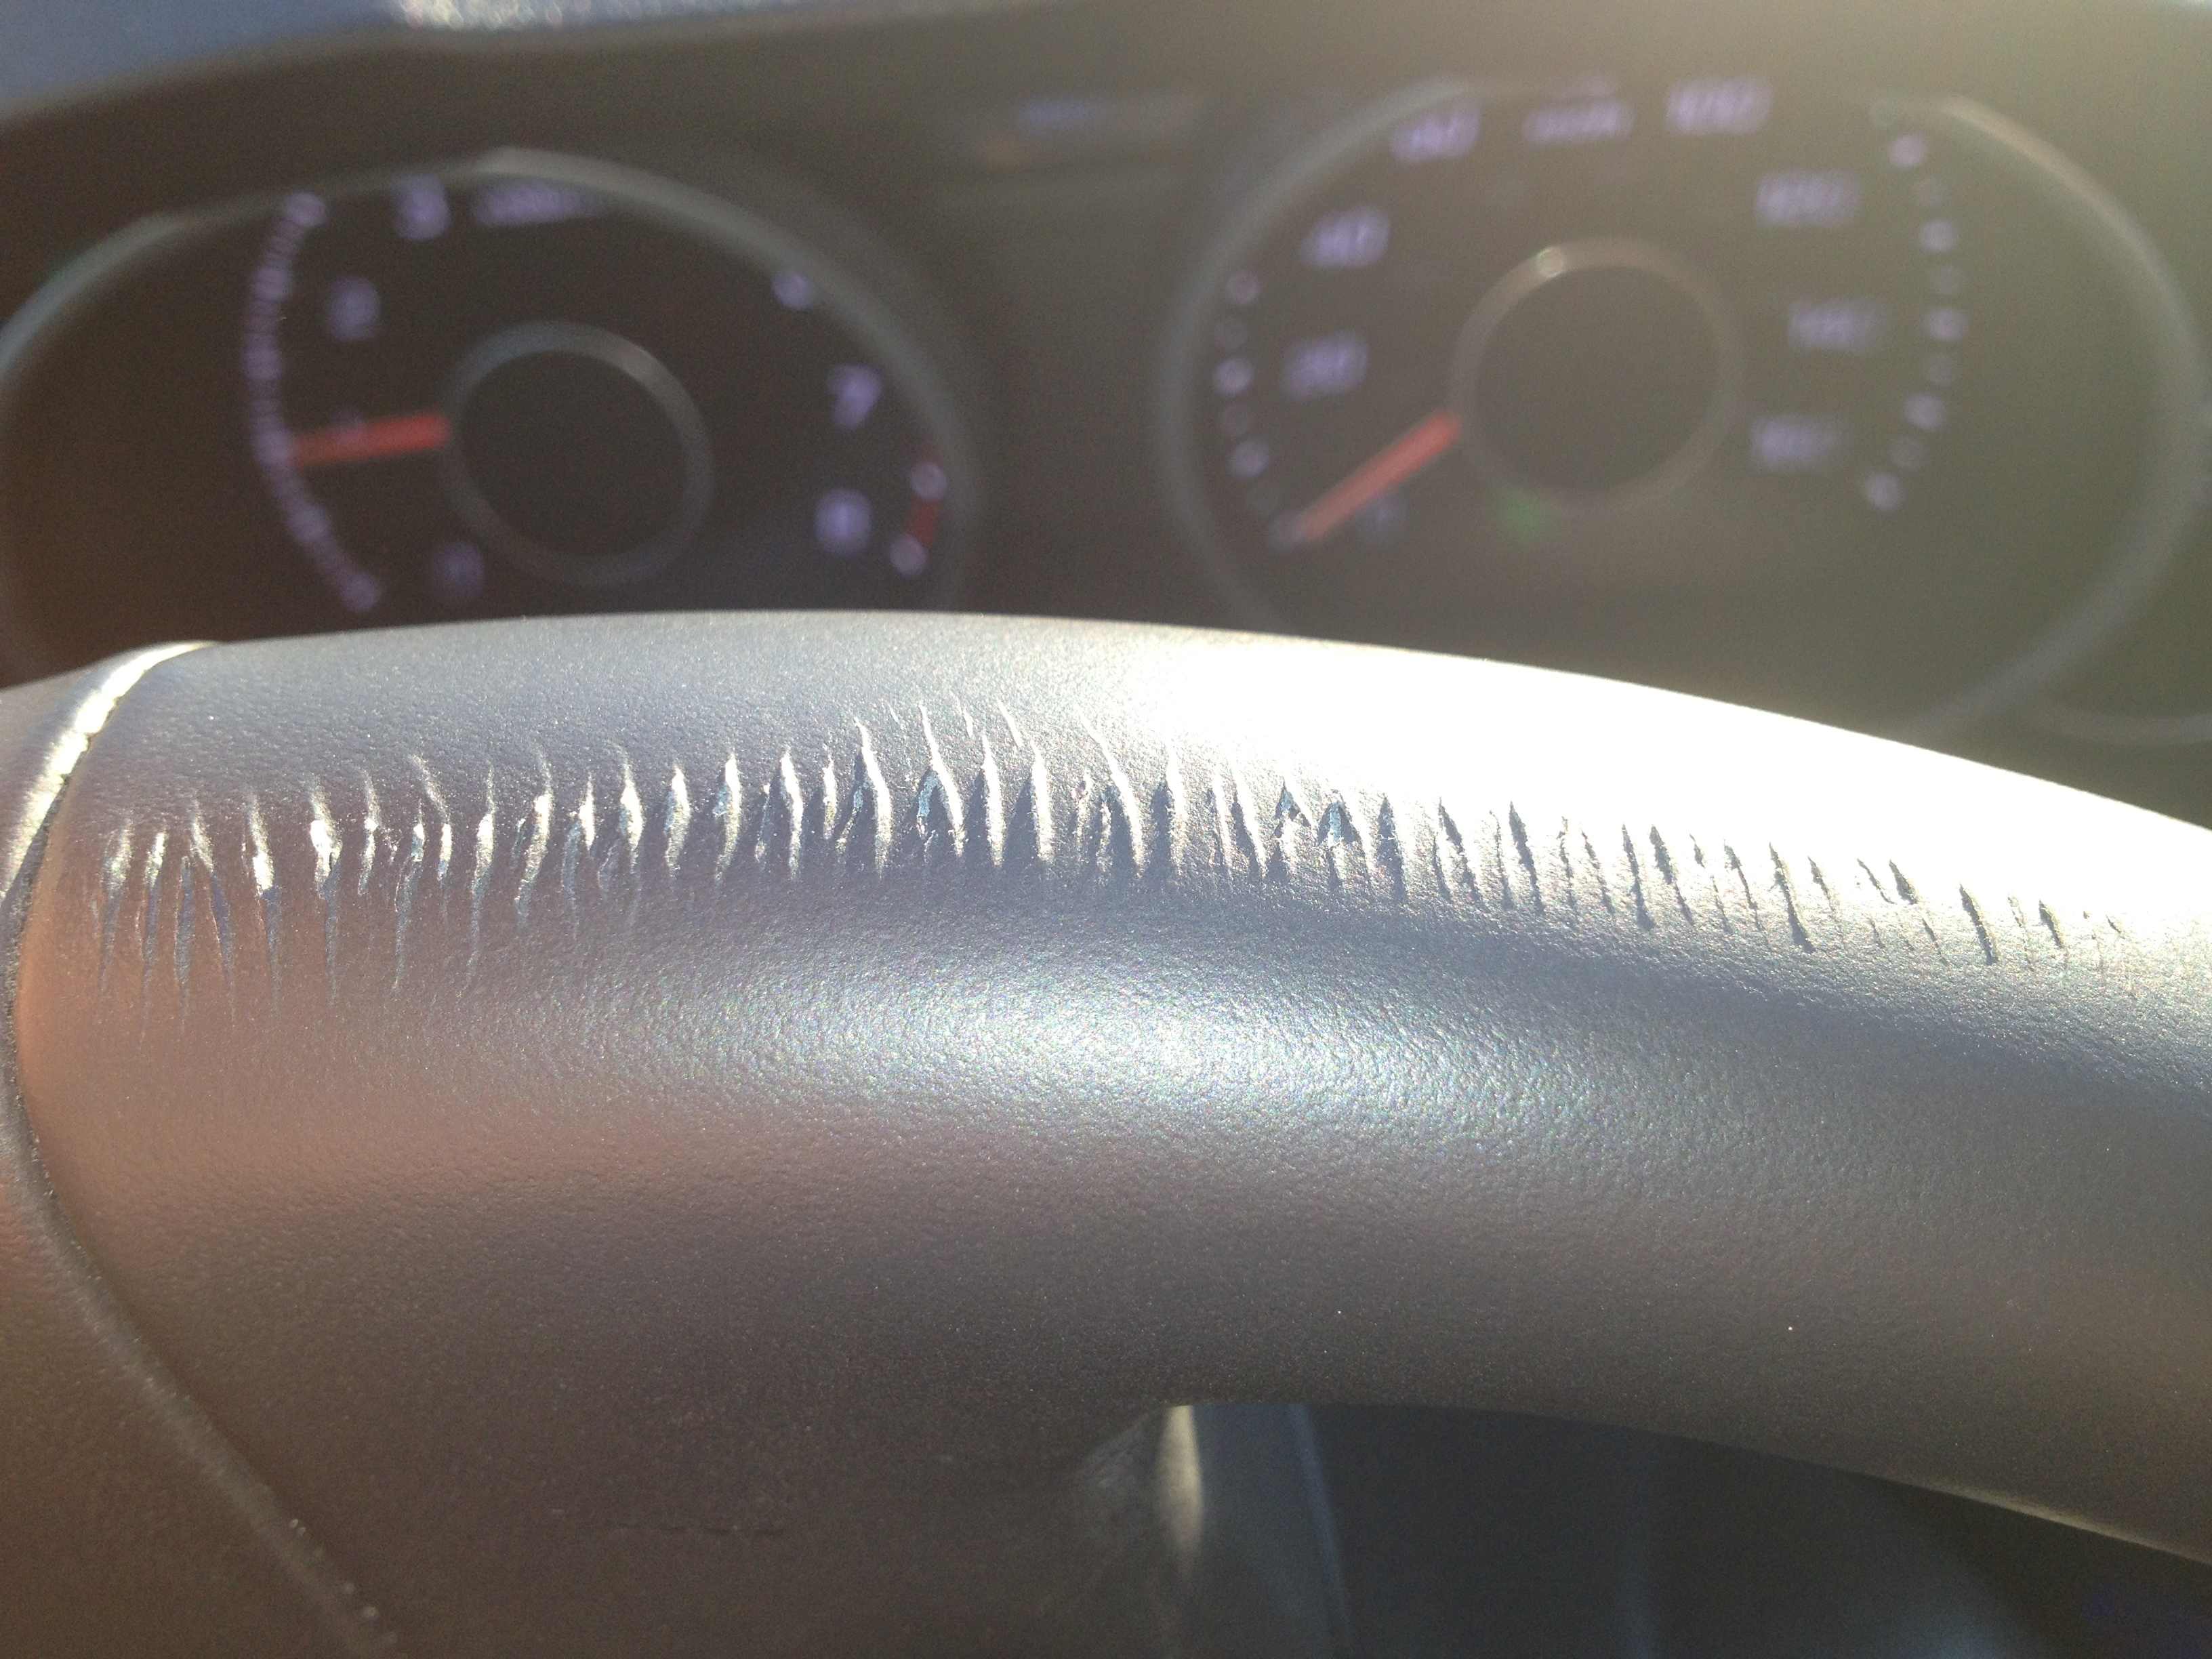 How could I fix a small scratch on leather wrapped steering wheel?